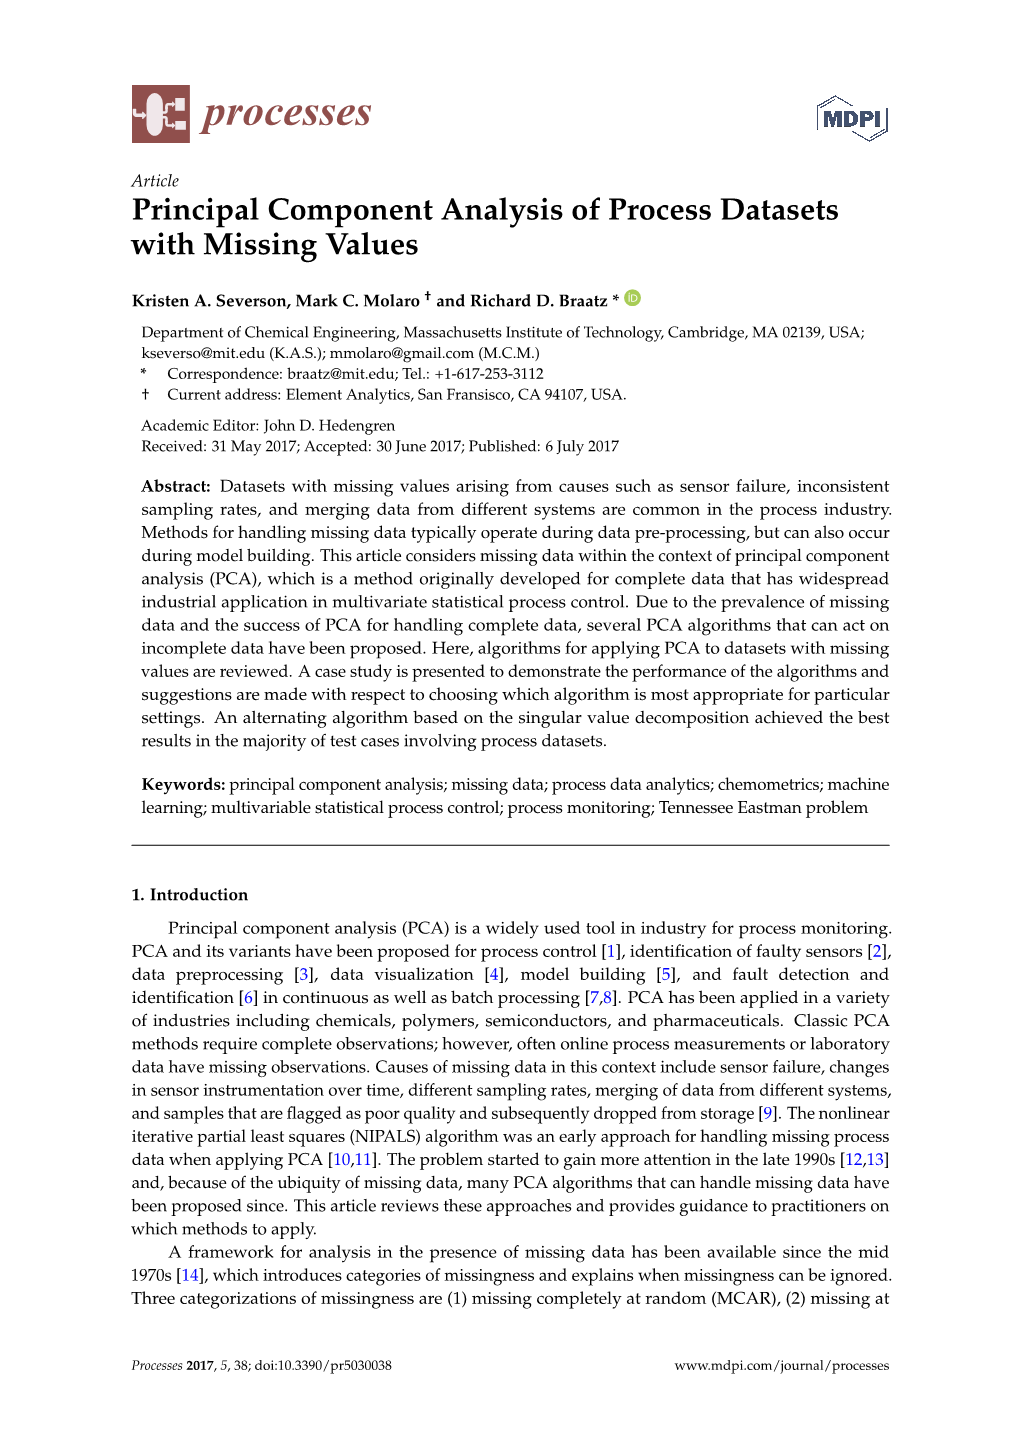 Principal Component Analysis of Process Datasets with Missing Values